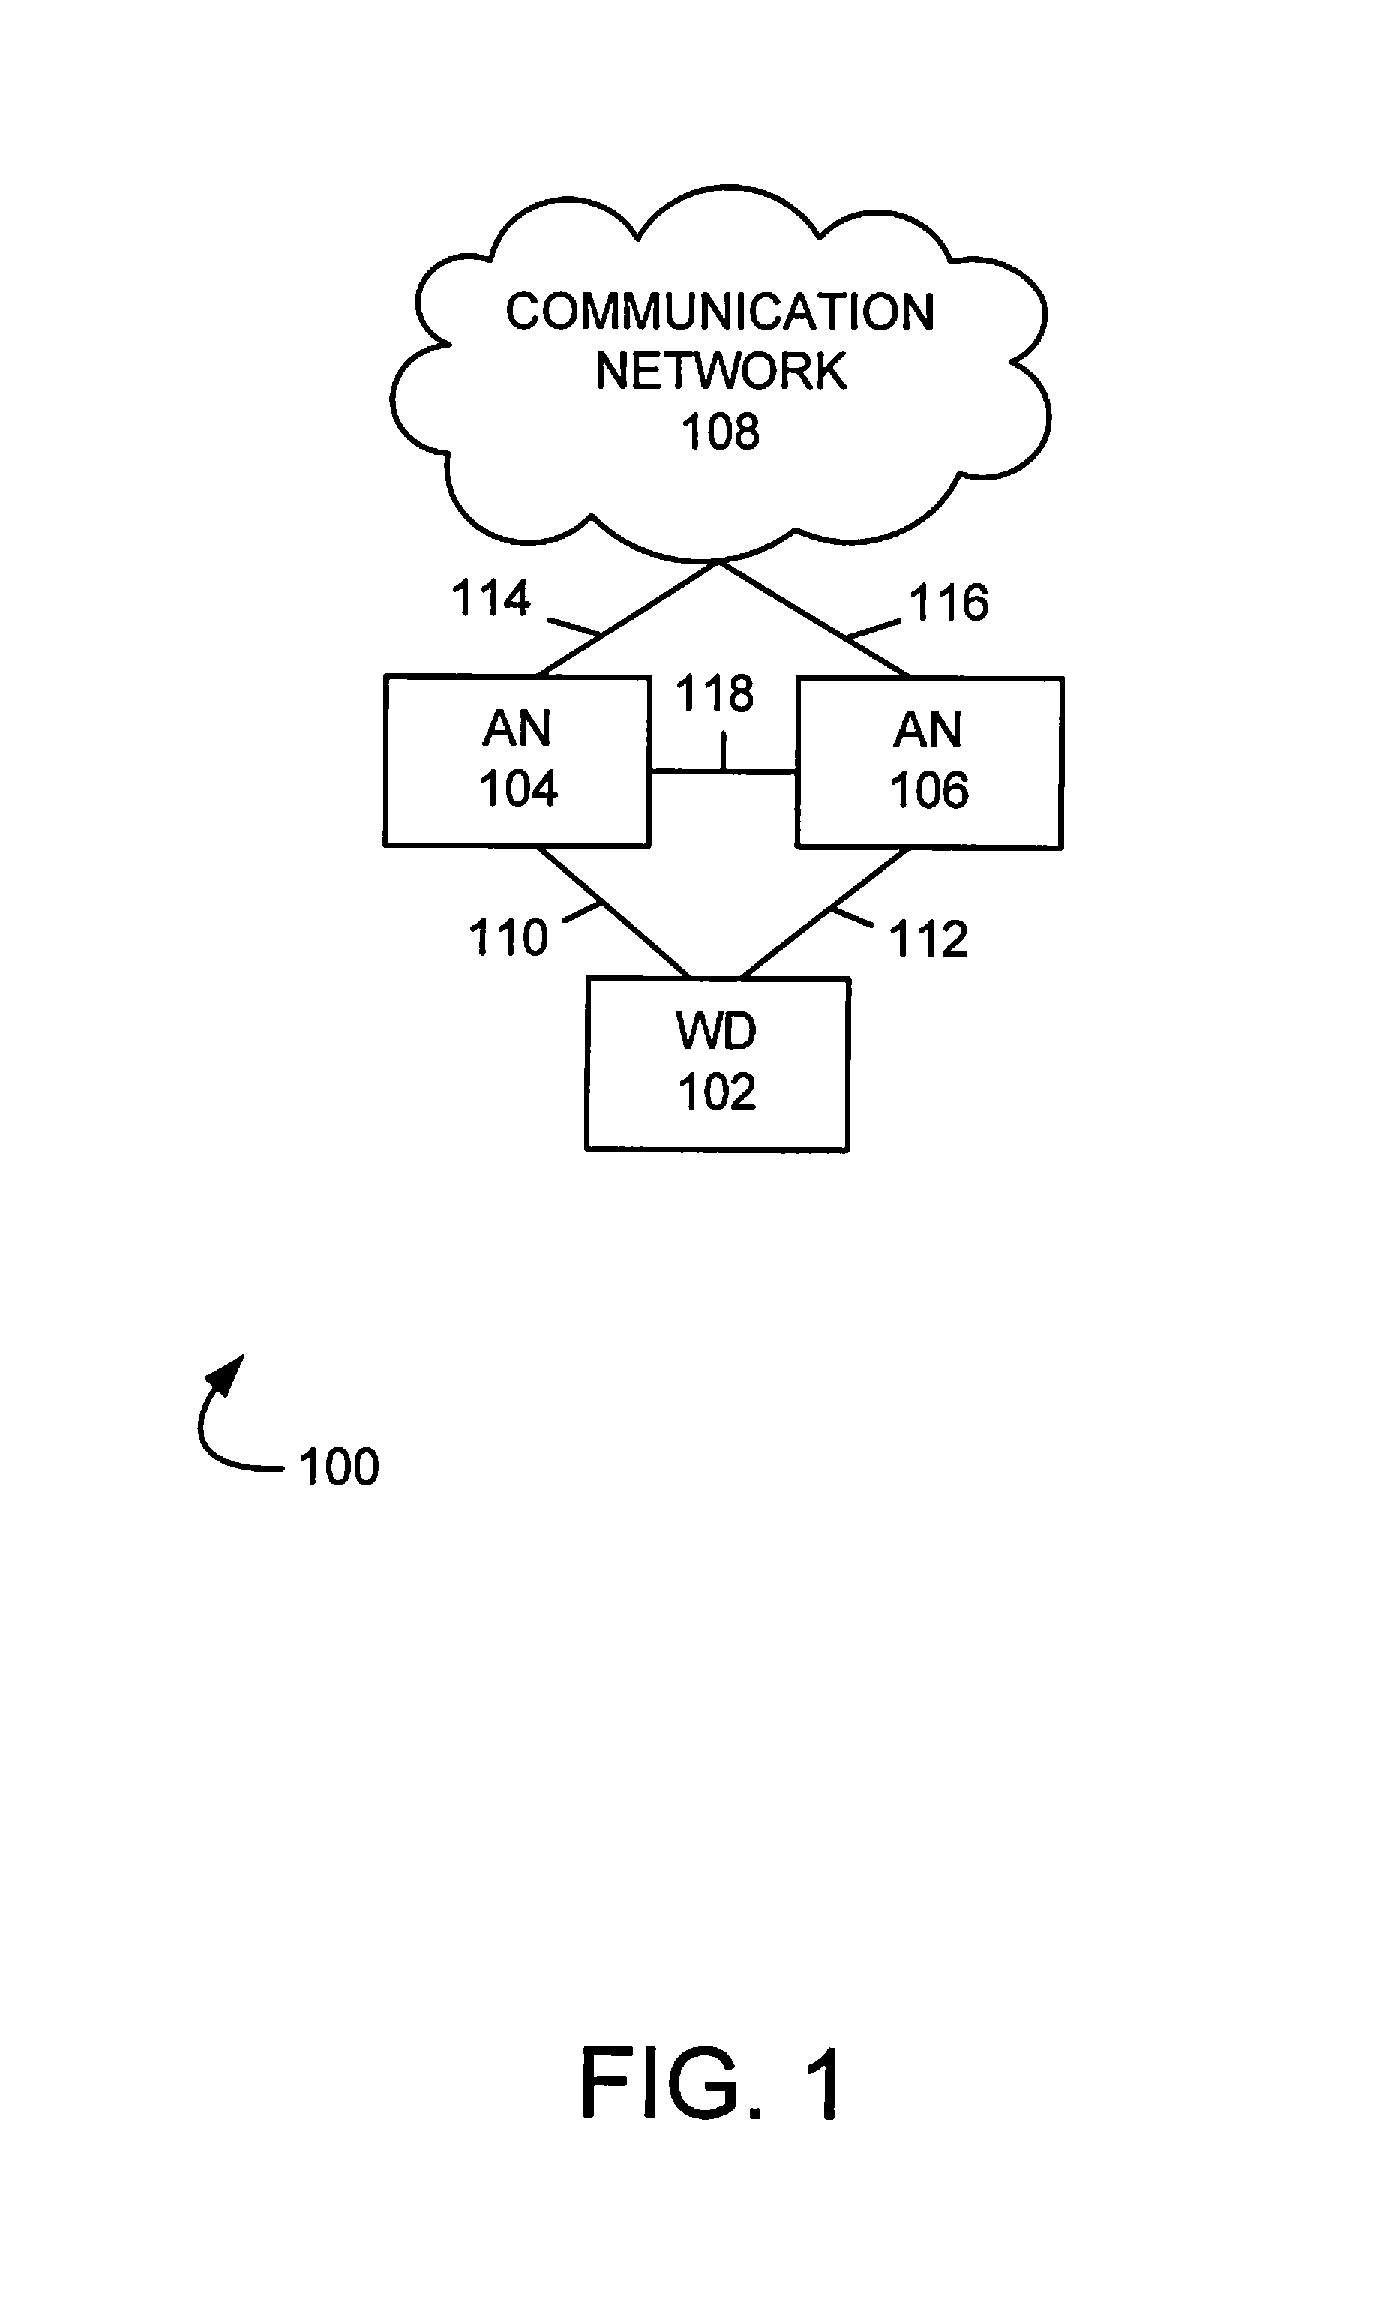 Systems and methods for determinng access node candidates for handover of wireless devices